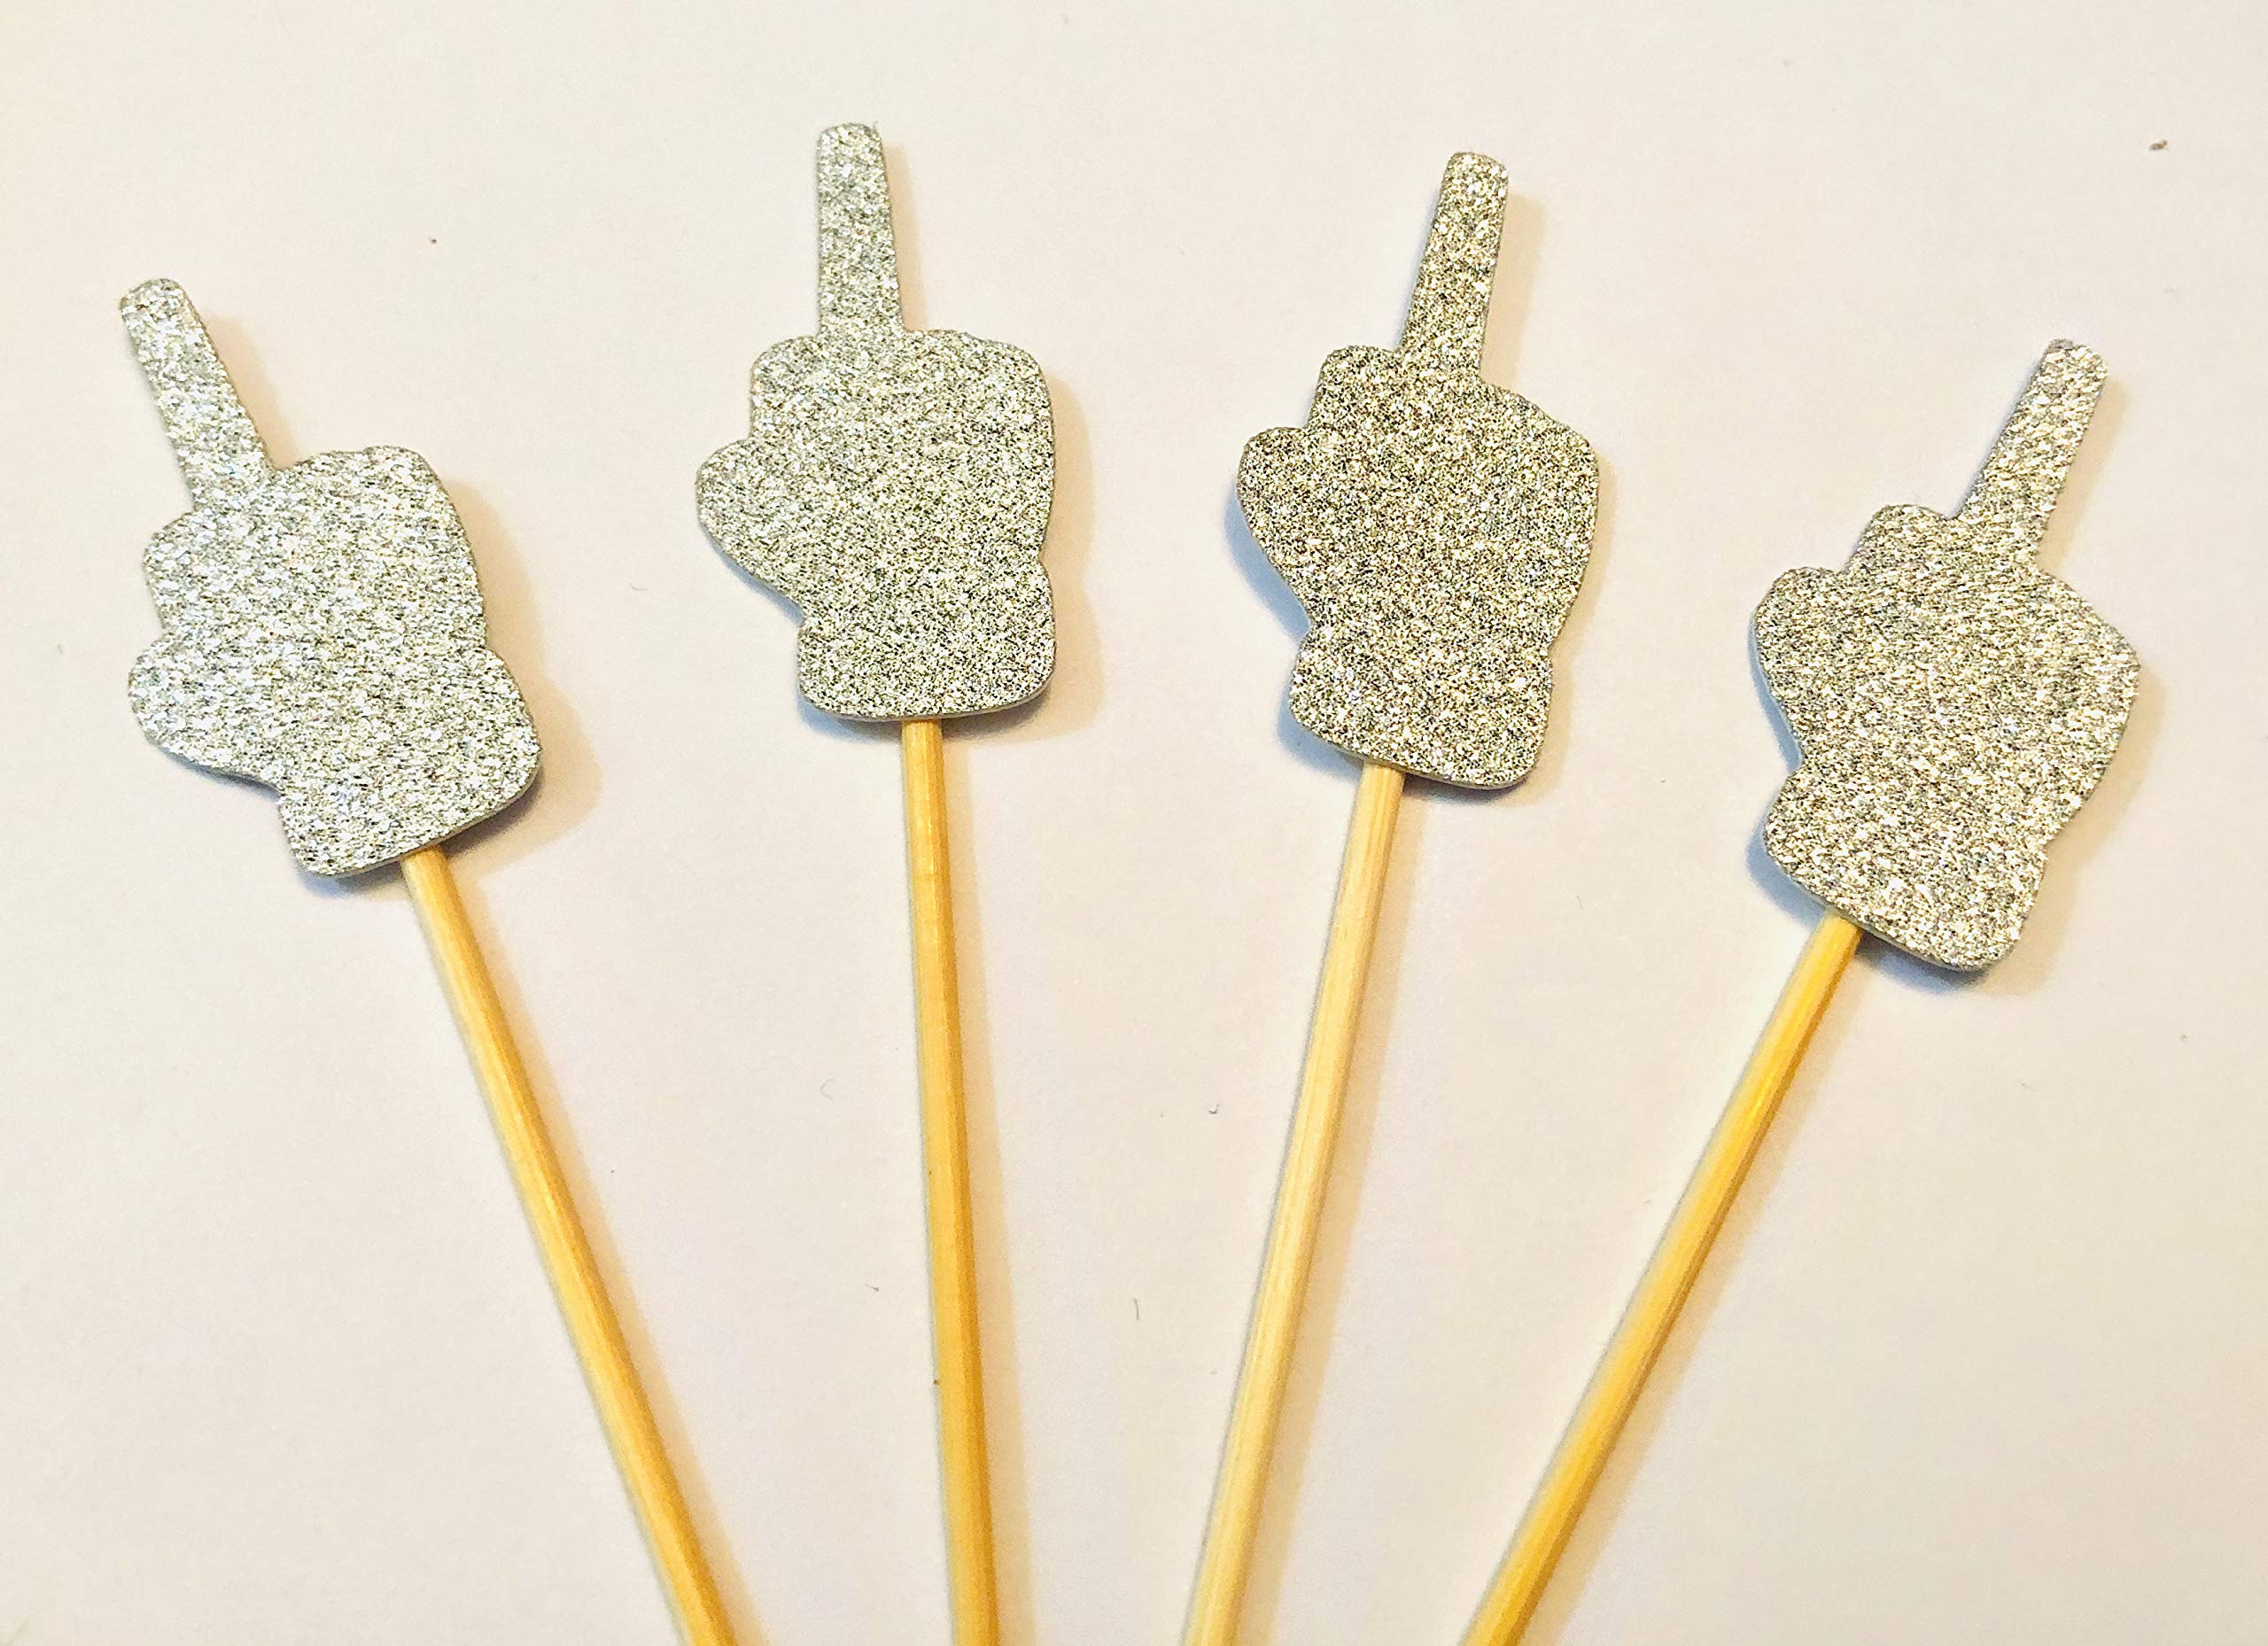 12 x Silver Middle finger Cupcake topper, Divorce Party cake decorations